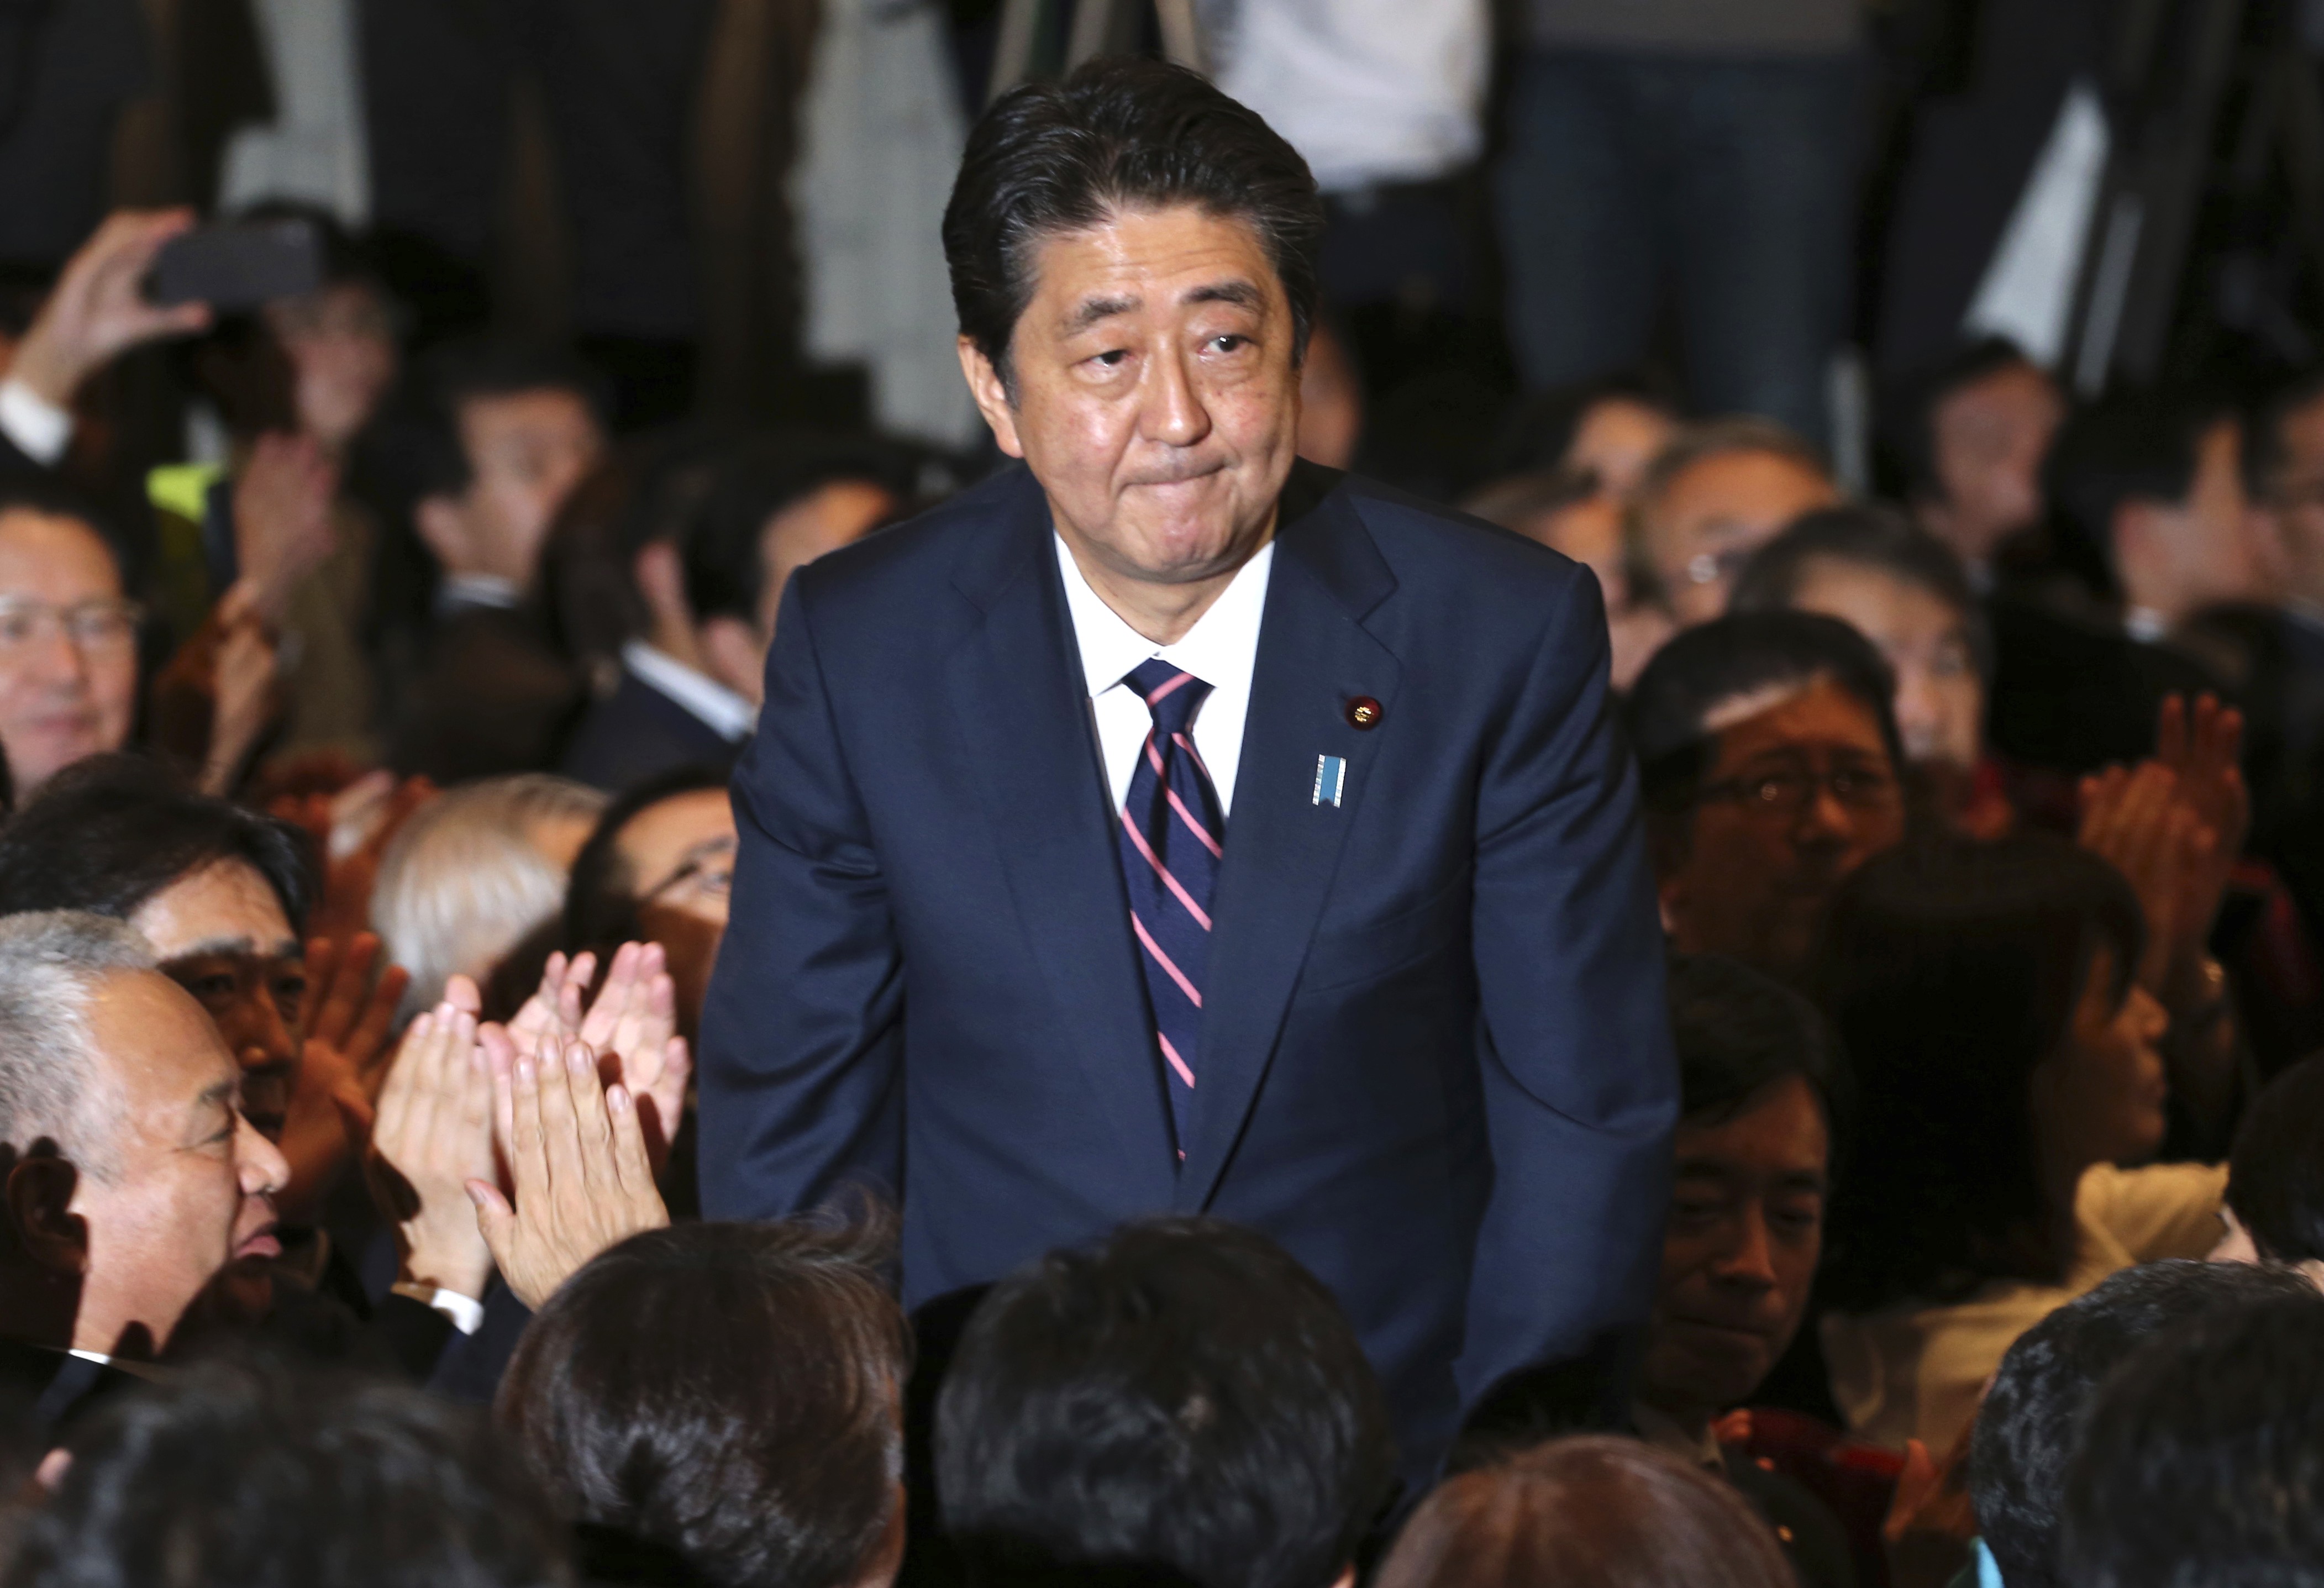 Liberal Democratic Party President Shinzo Abe receives applause from the LDP lawmakers soon after winning a third term as LDP leader, paving the way for him to serve as prime minister for up to three more years. Photo: AP